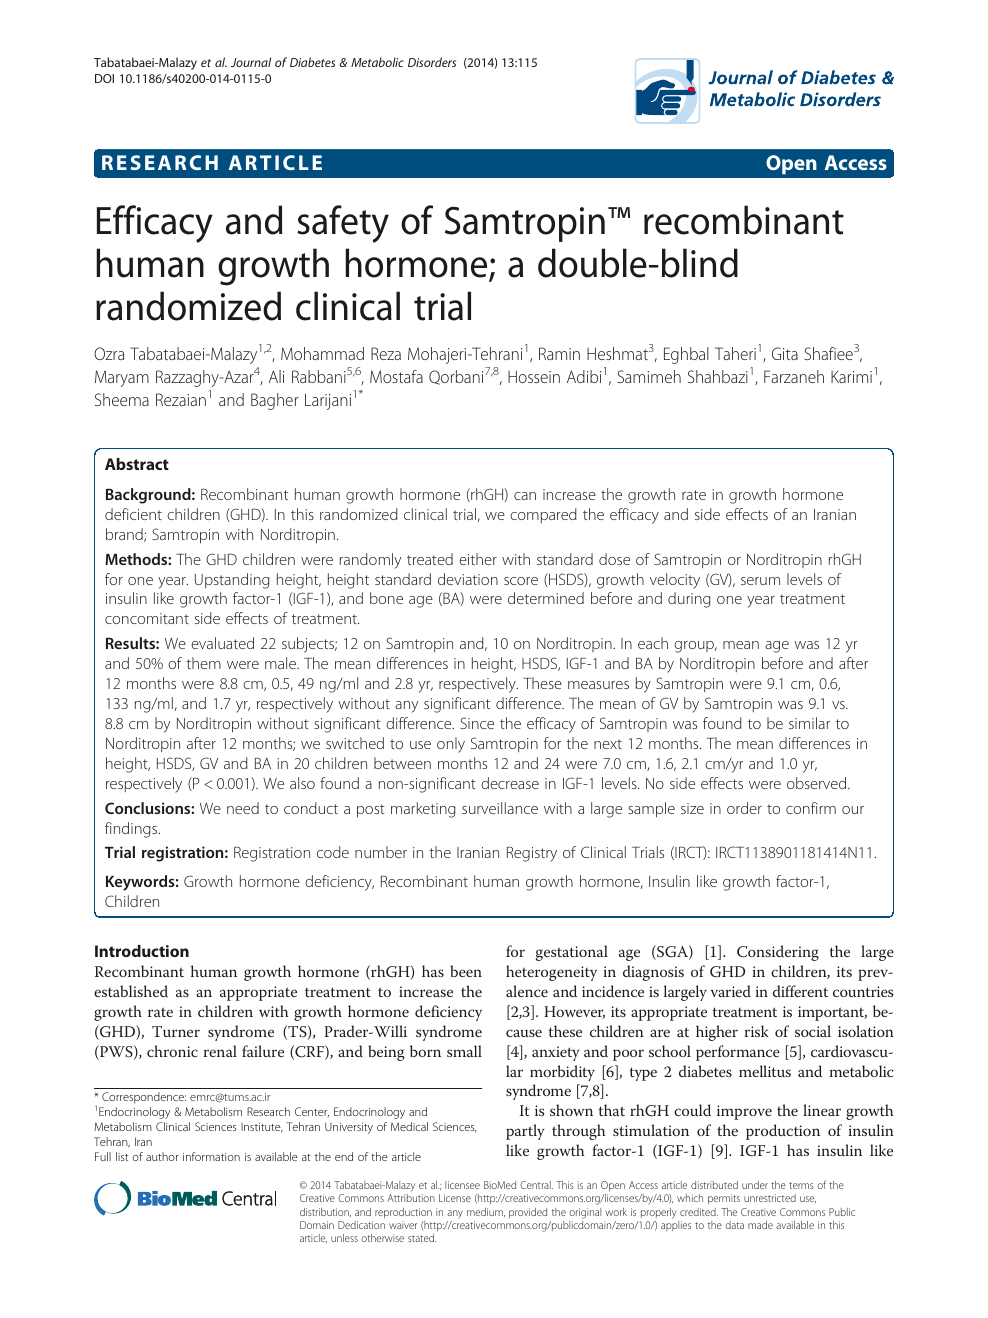 Efficacy and safety of Samtropin™ recombinant human growth hormone; a  double-blind randomized clinical trial – topic of research paper in Health  sciences. Download scholarly article PDF and read for free on CyberLeninka